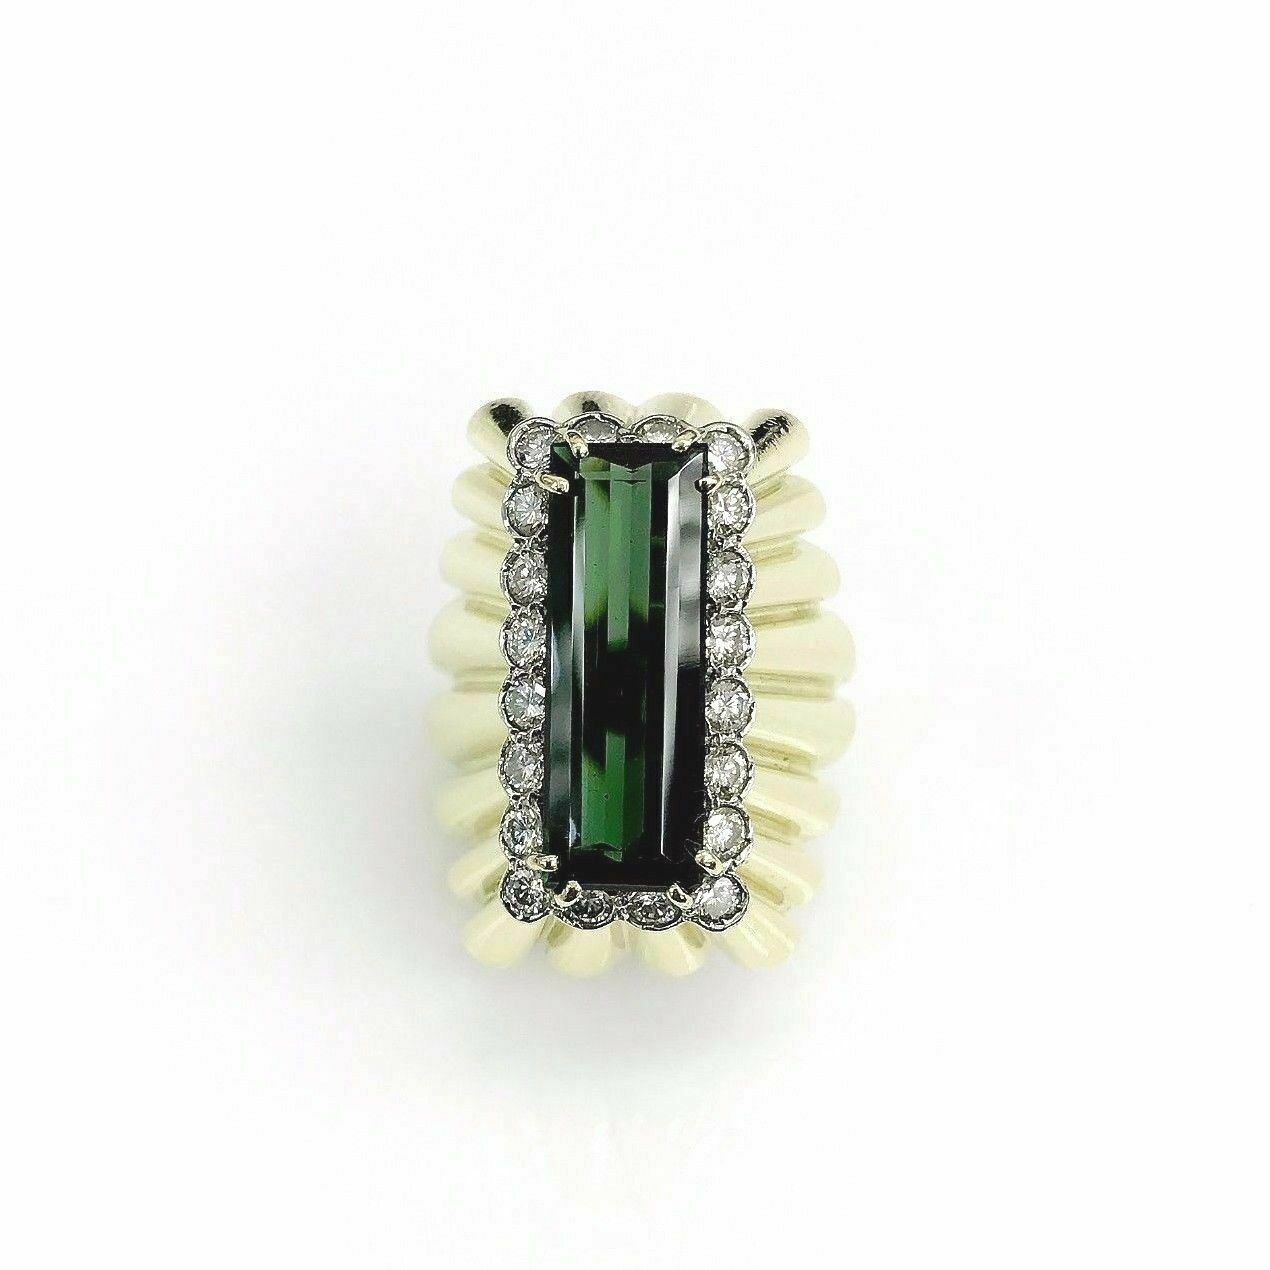 Vintage Solid 18K Gold 10.65 Carats t.w. Diamond and Green Tourmaline Ring 1960s